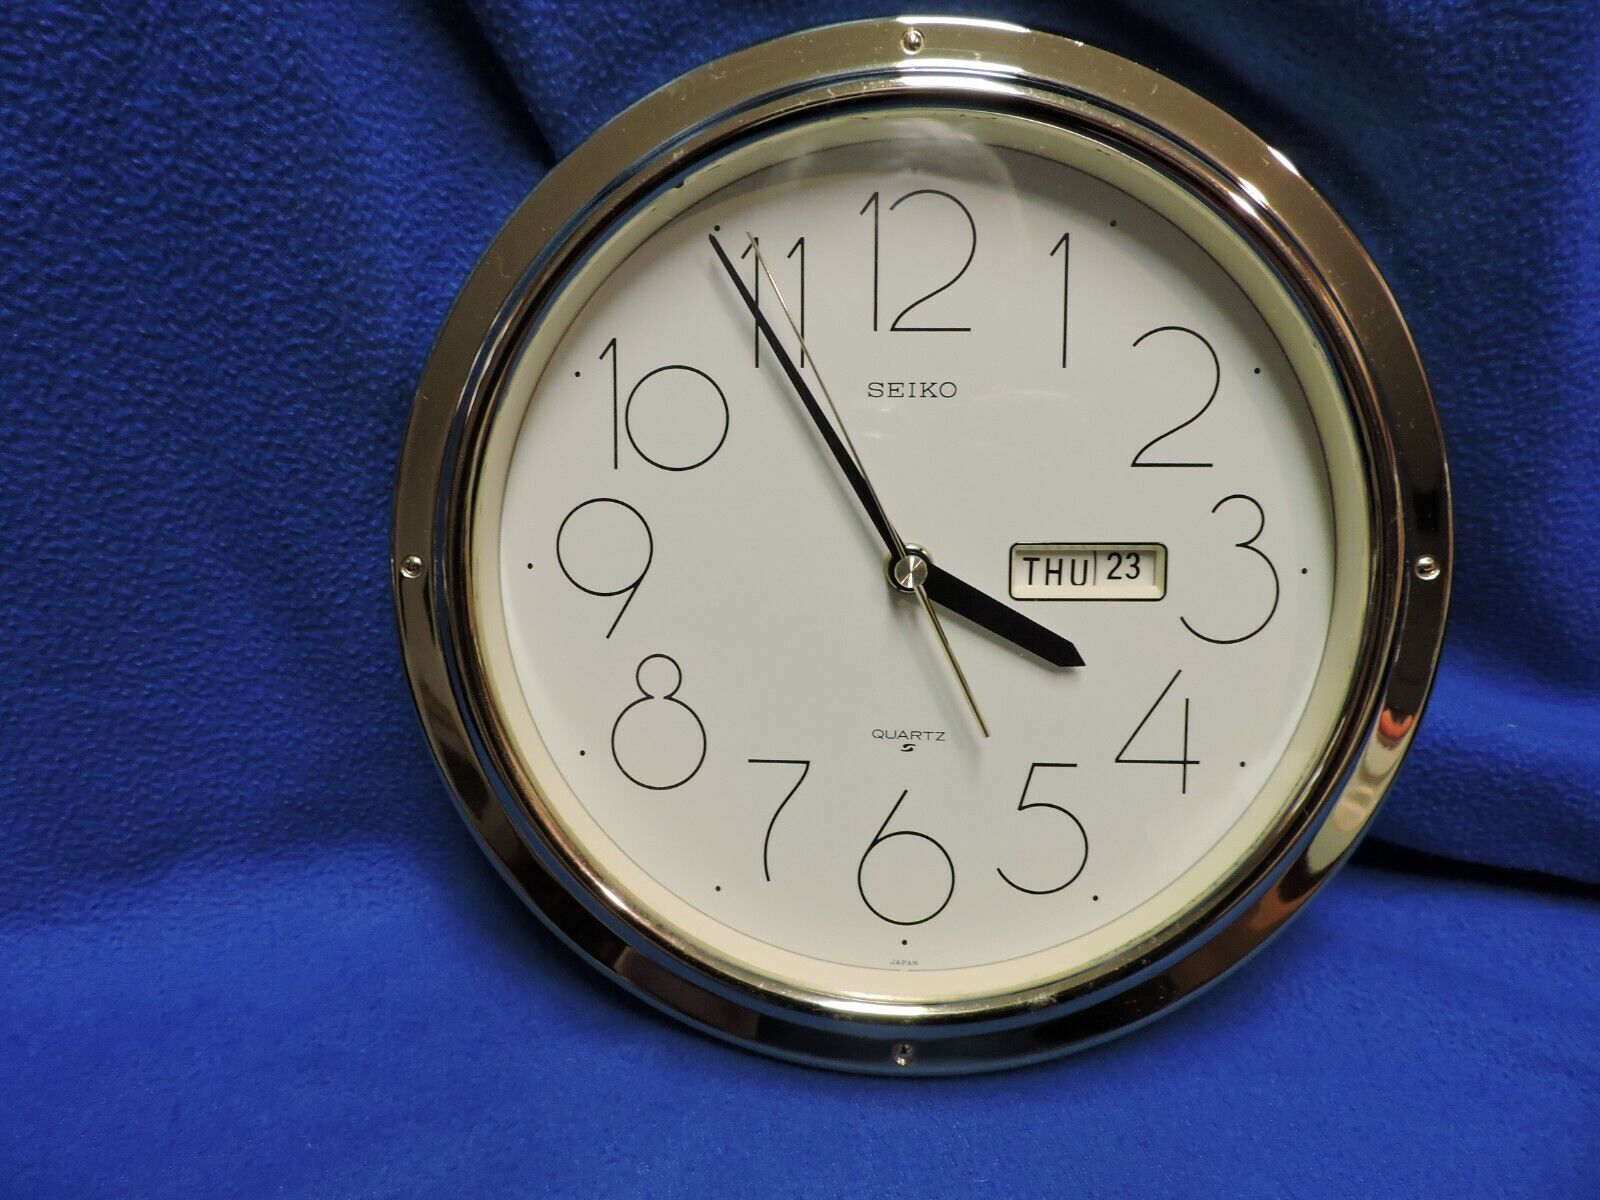 Vintage Seiko Wall Clock Date and Days of Week Gold | eBay